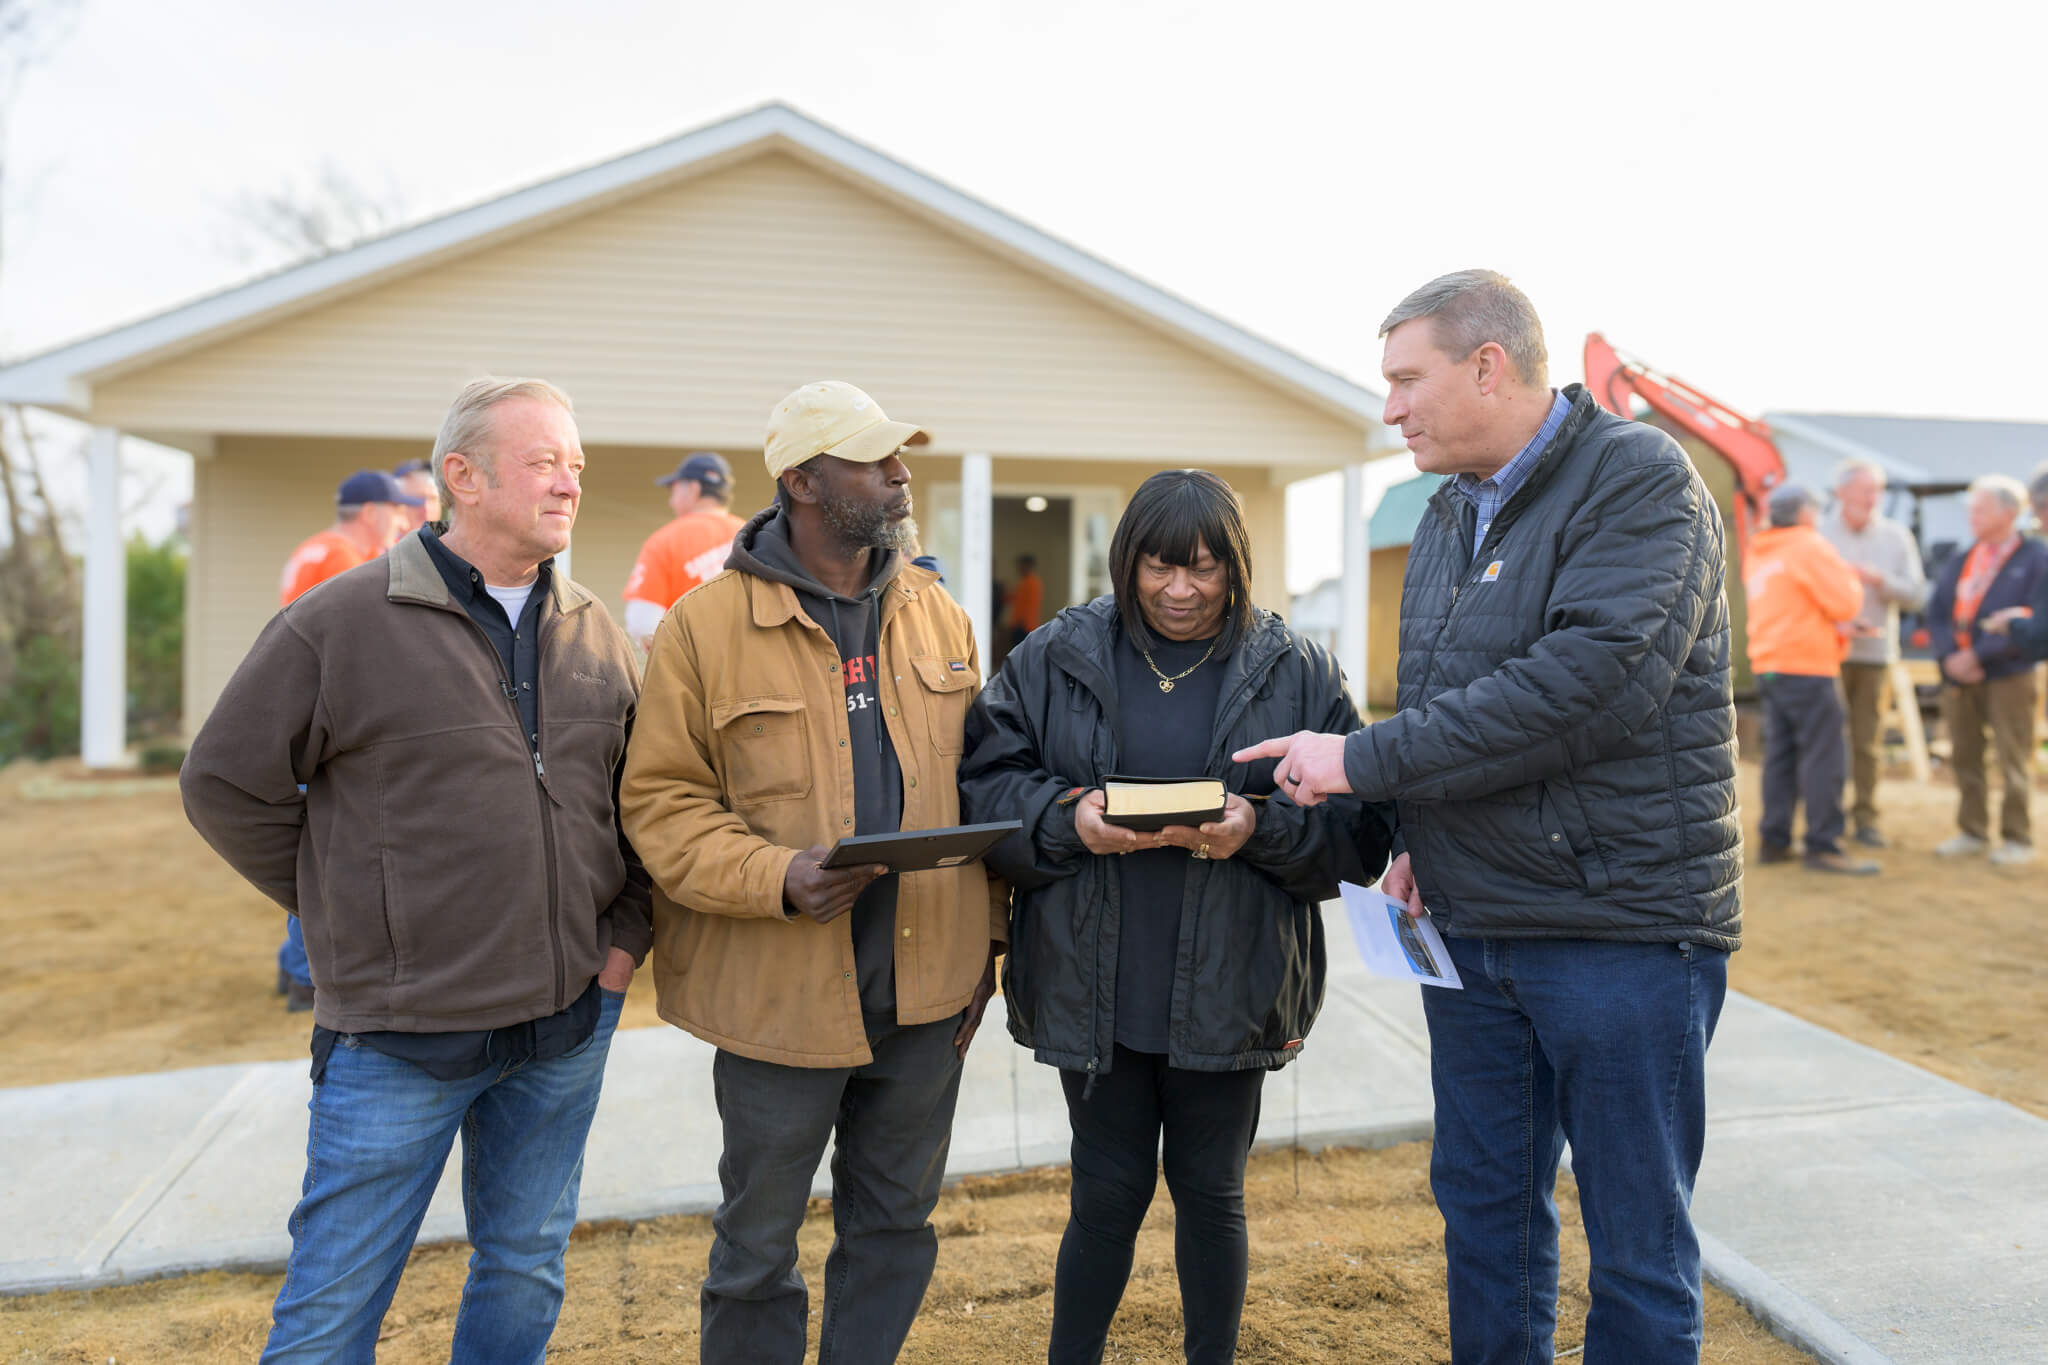 Luther Harrison, vice president of North American Ministries at Samaritan's Purse, encourages Lewis and his wife to enjoy the riches of Scripture.